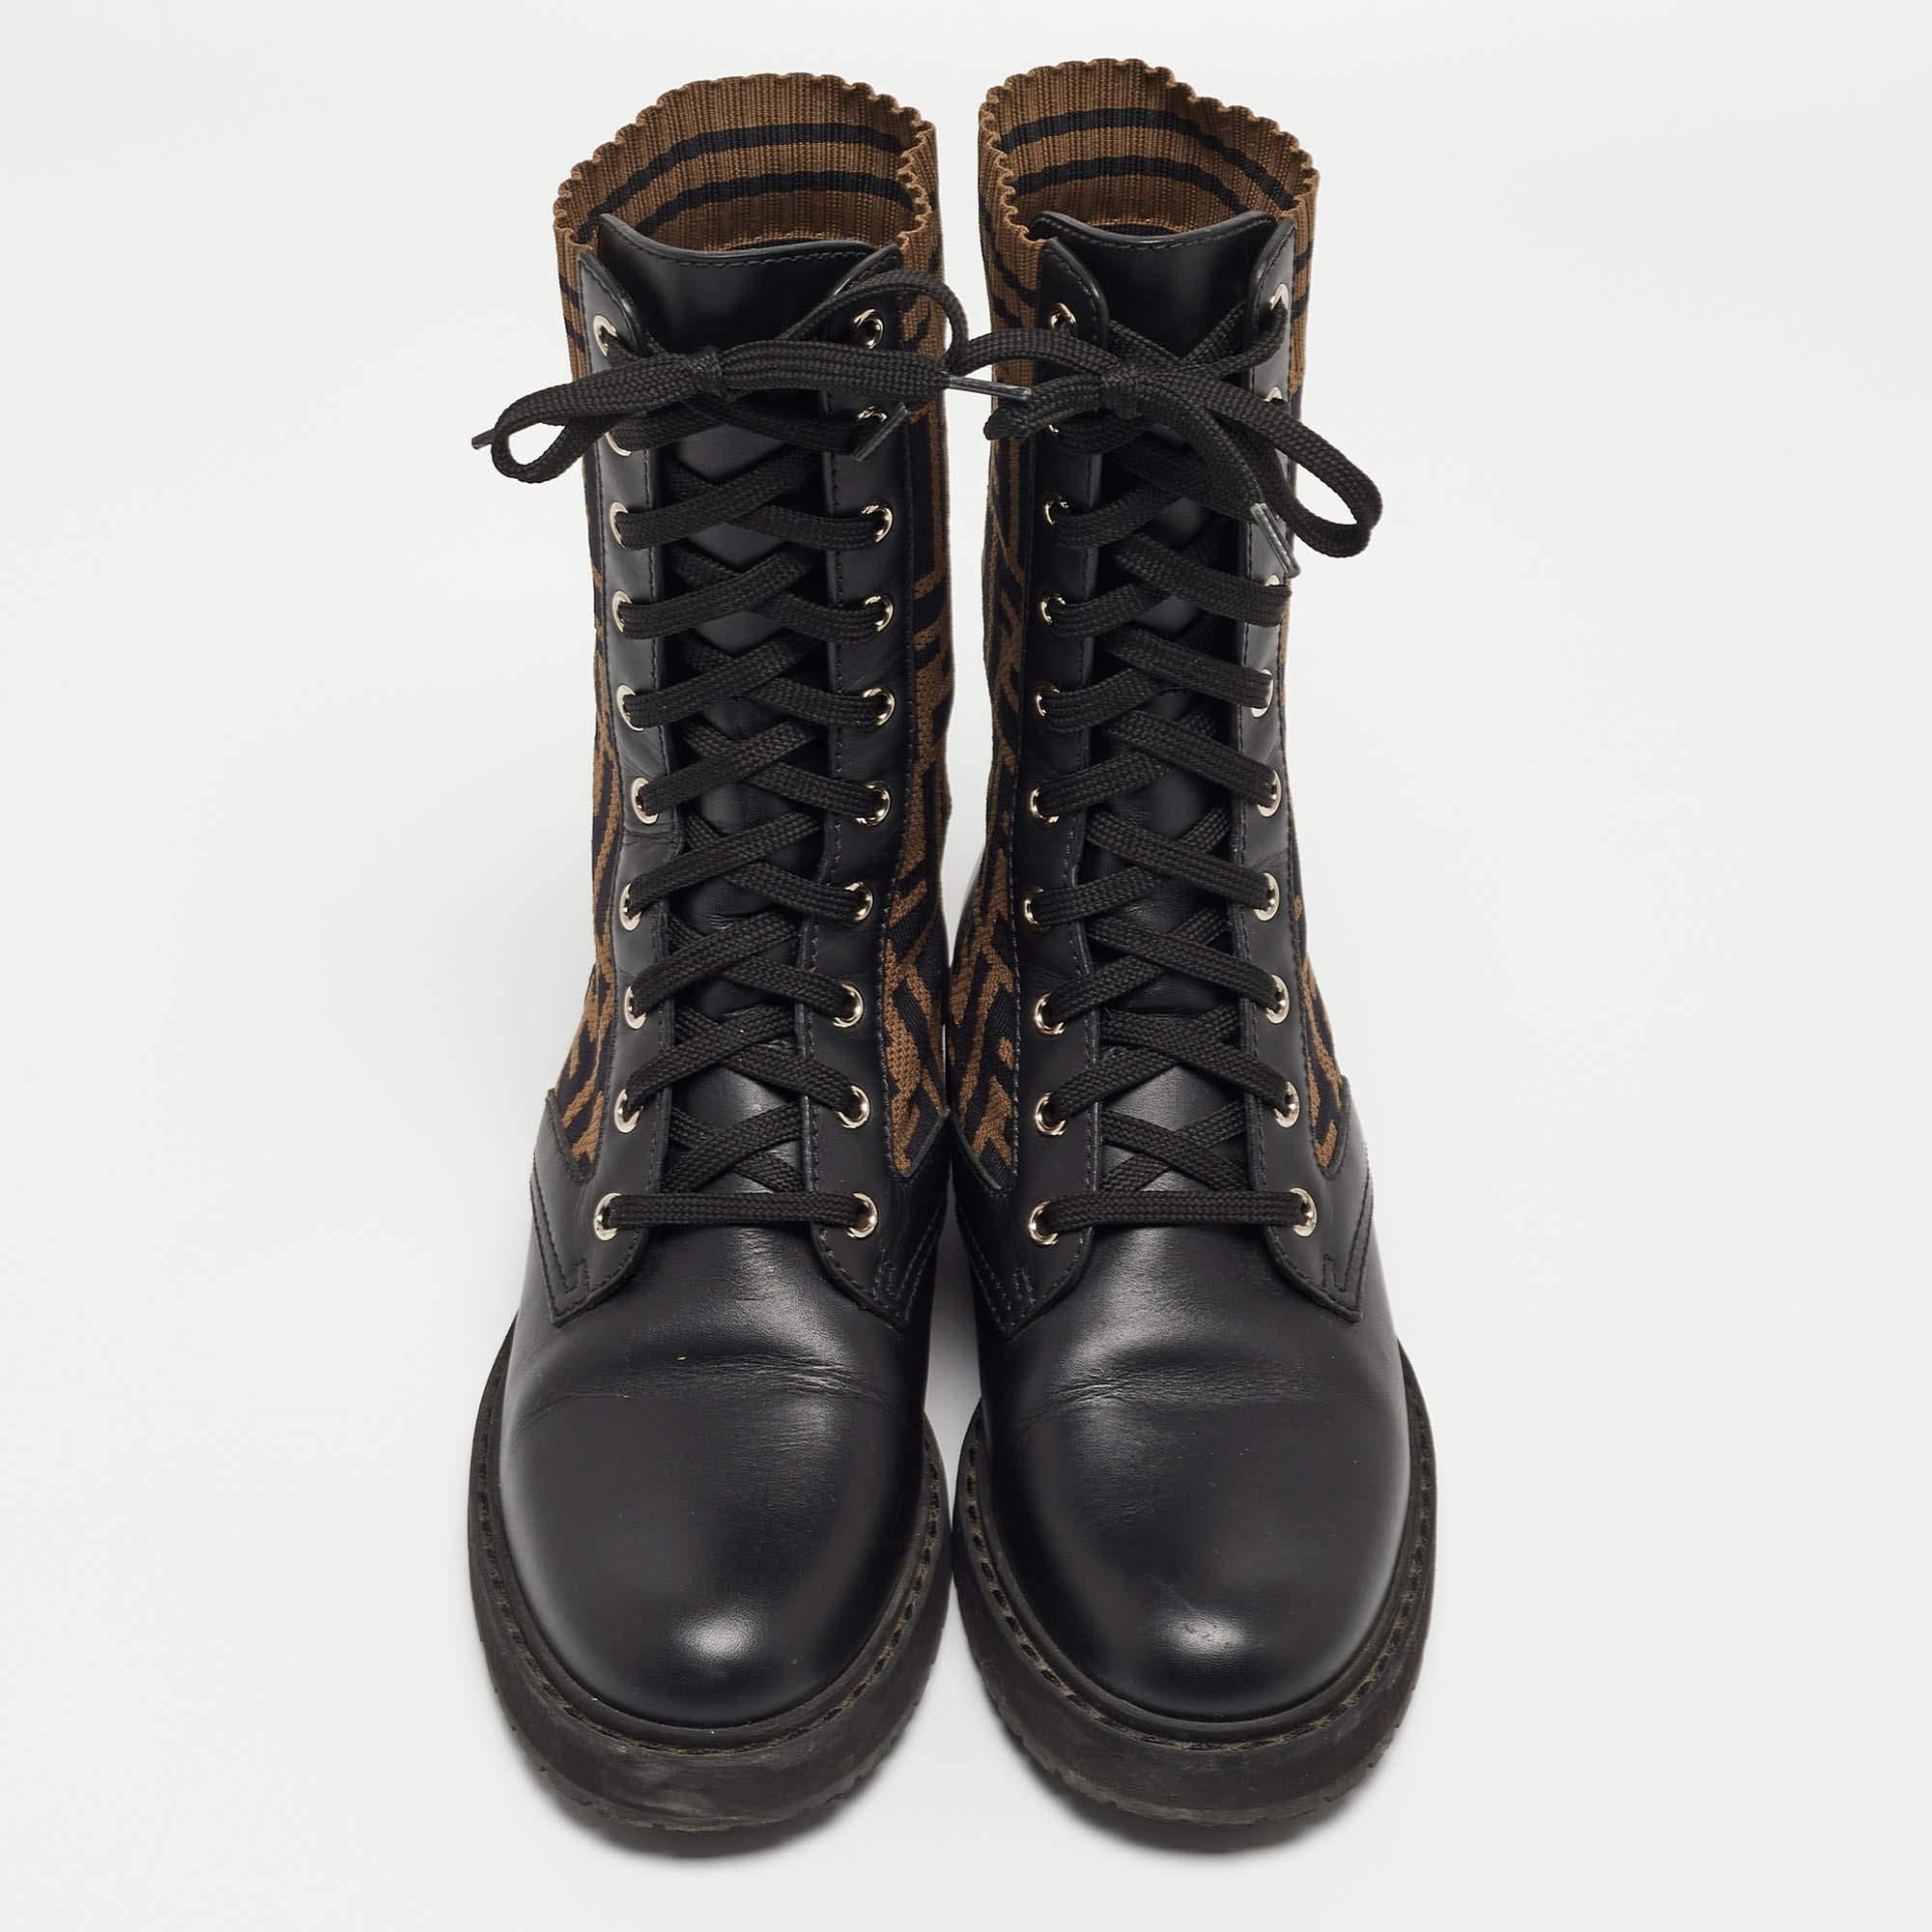 These stylish Rockoko combat boots come from the house of Fendi. Crafted in Italy, they are made from leather in a lovely shade of black. They are styled with lace-up fronts, sock-style FF motif detailing in stretch fabric, and silver-tone hardware.